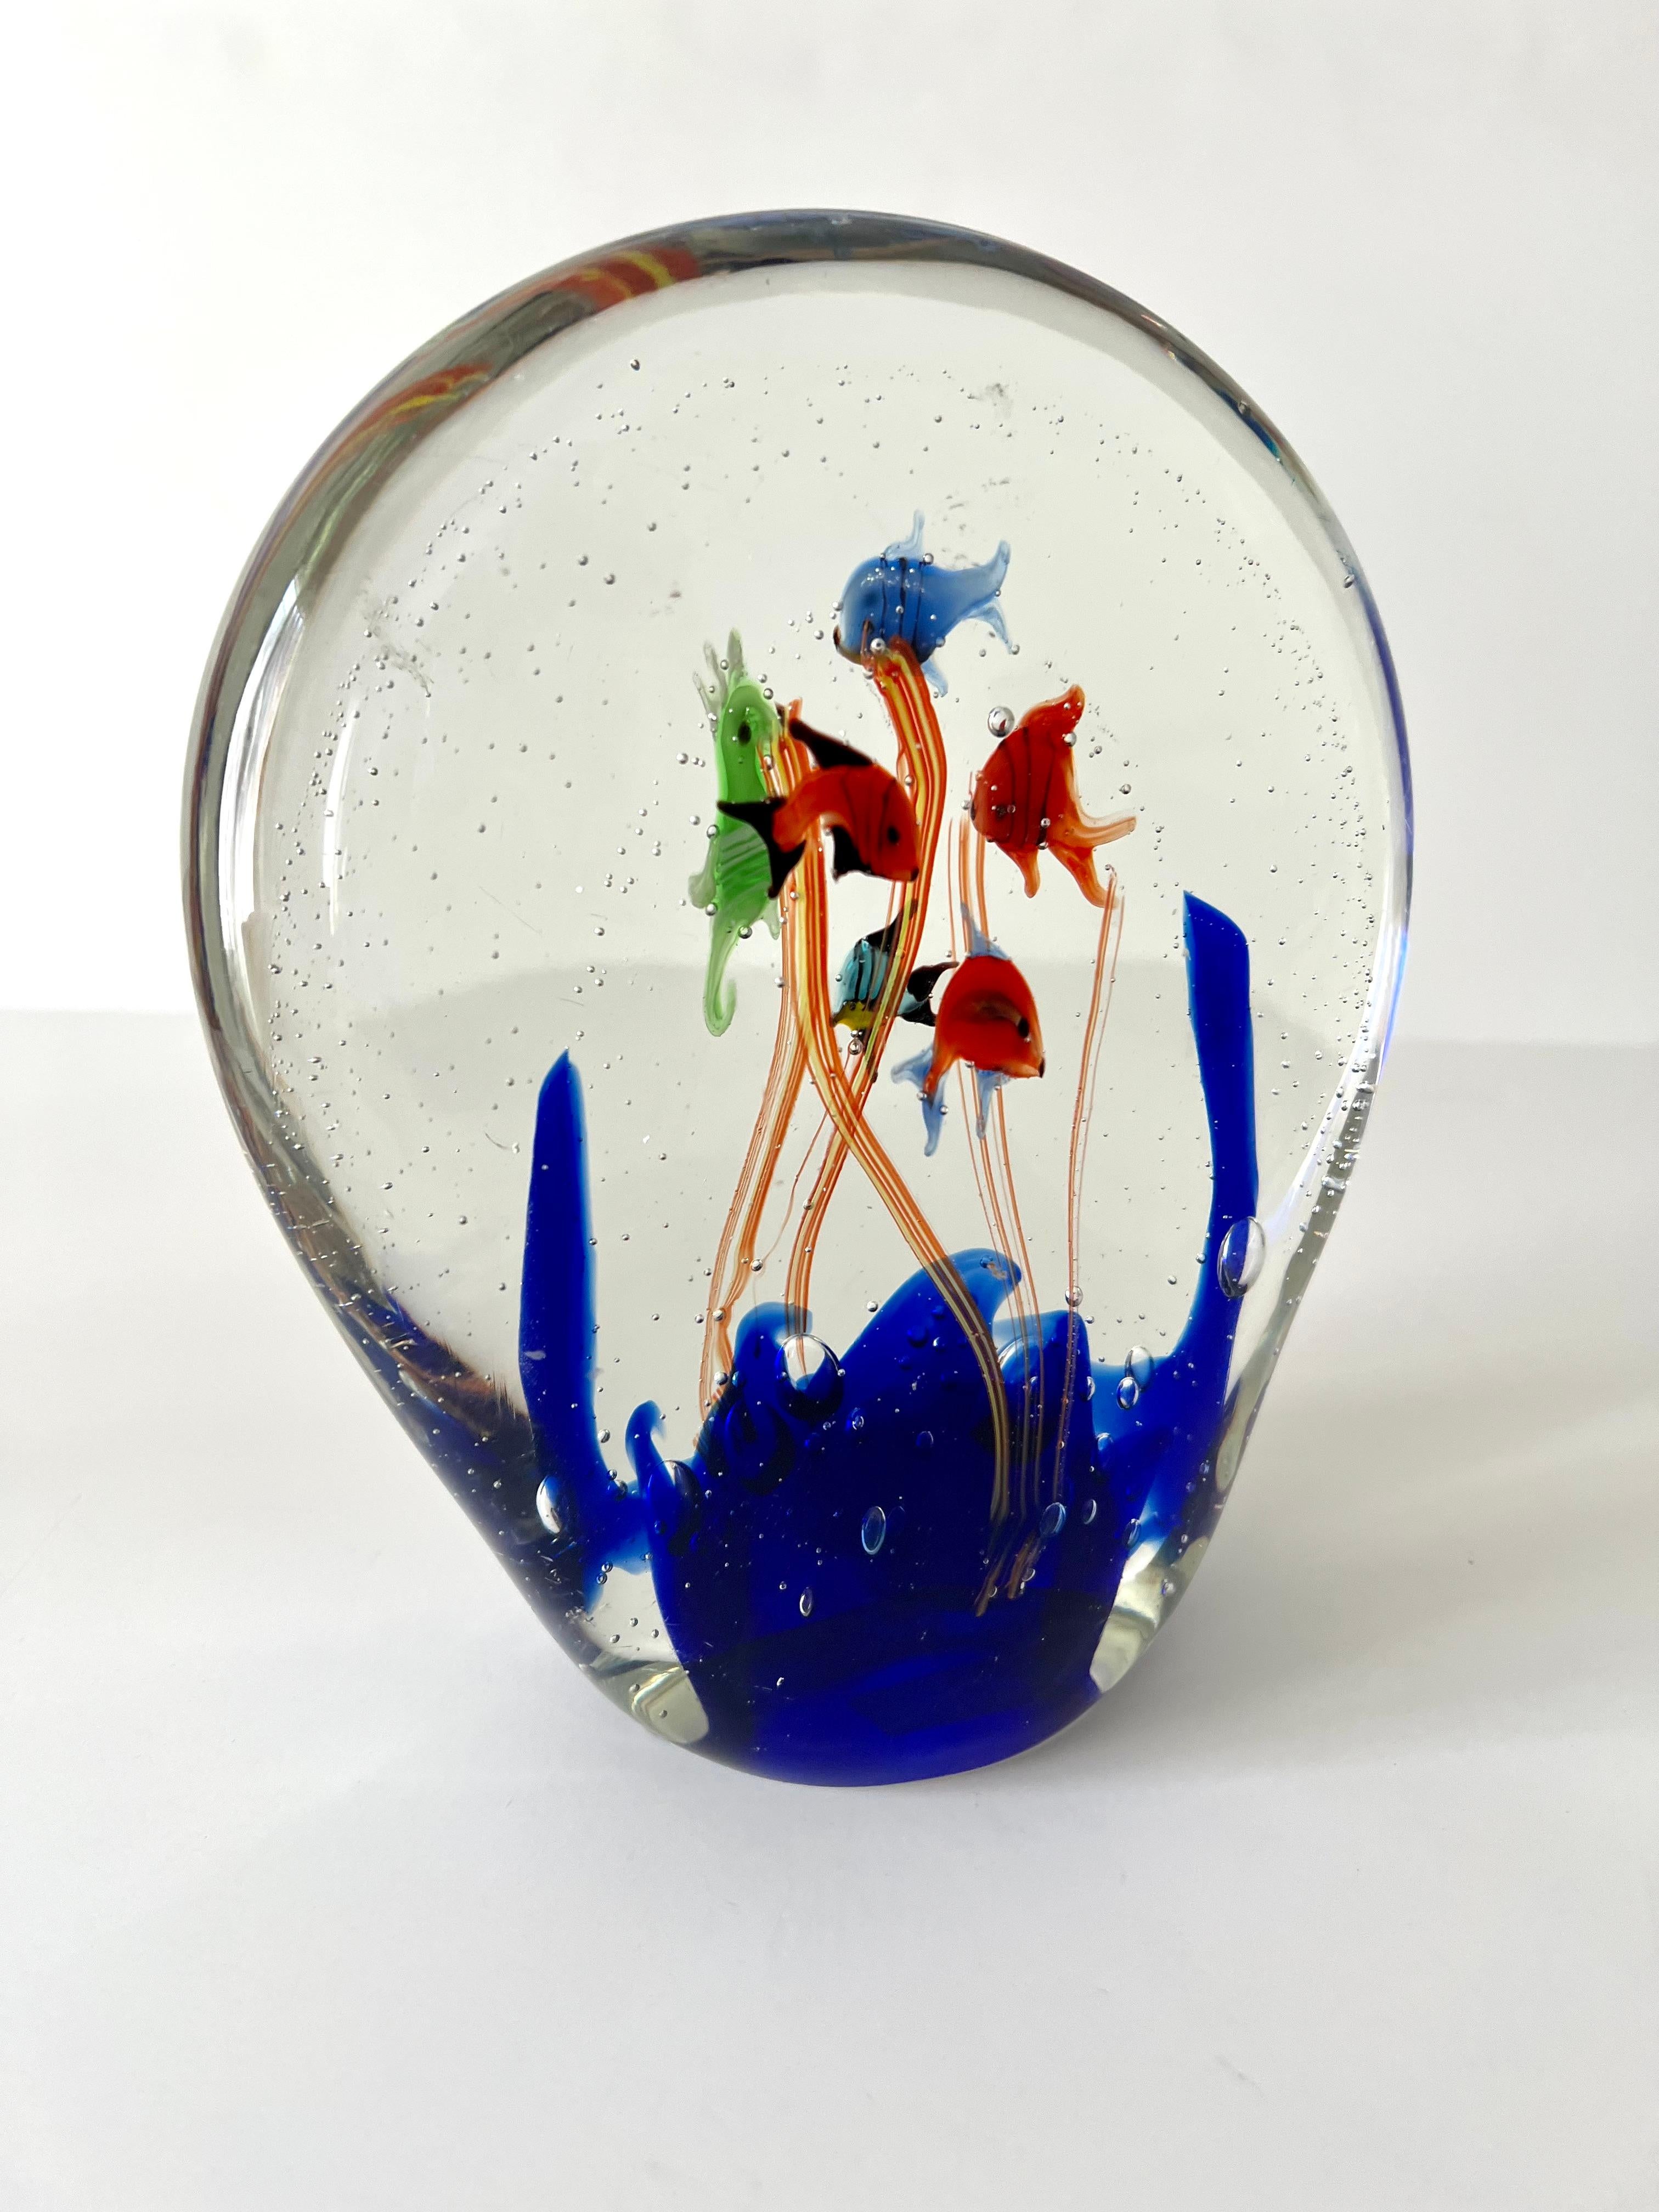 Very unique and rare shape Murano Paper Weight depicting a ocean scene or an aquarium - with fish, ocean plants and bubbles in all the right places... a wonderfully animated and decorative piece. A nice paperweight or decorative piece on any shelf -